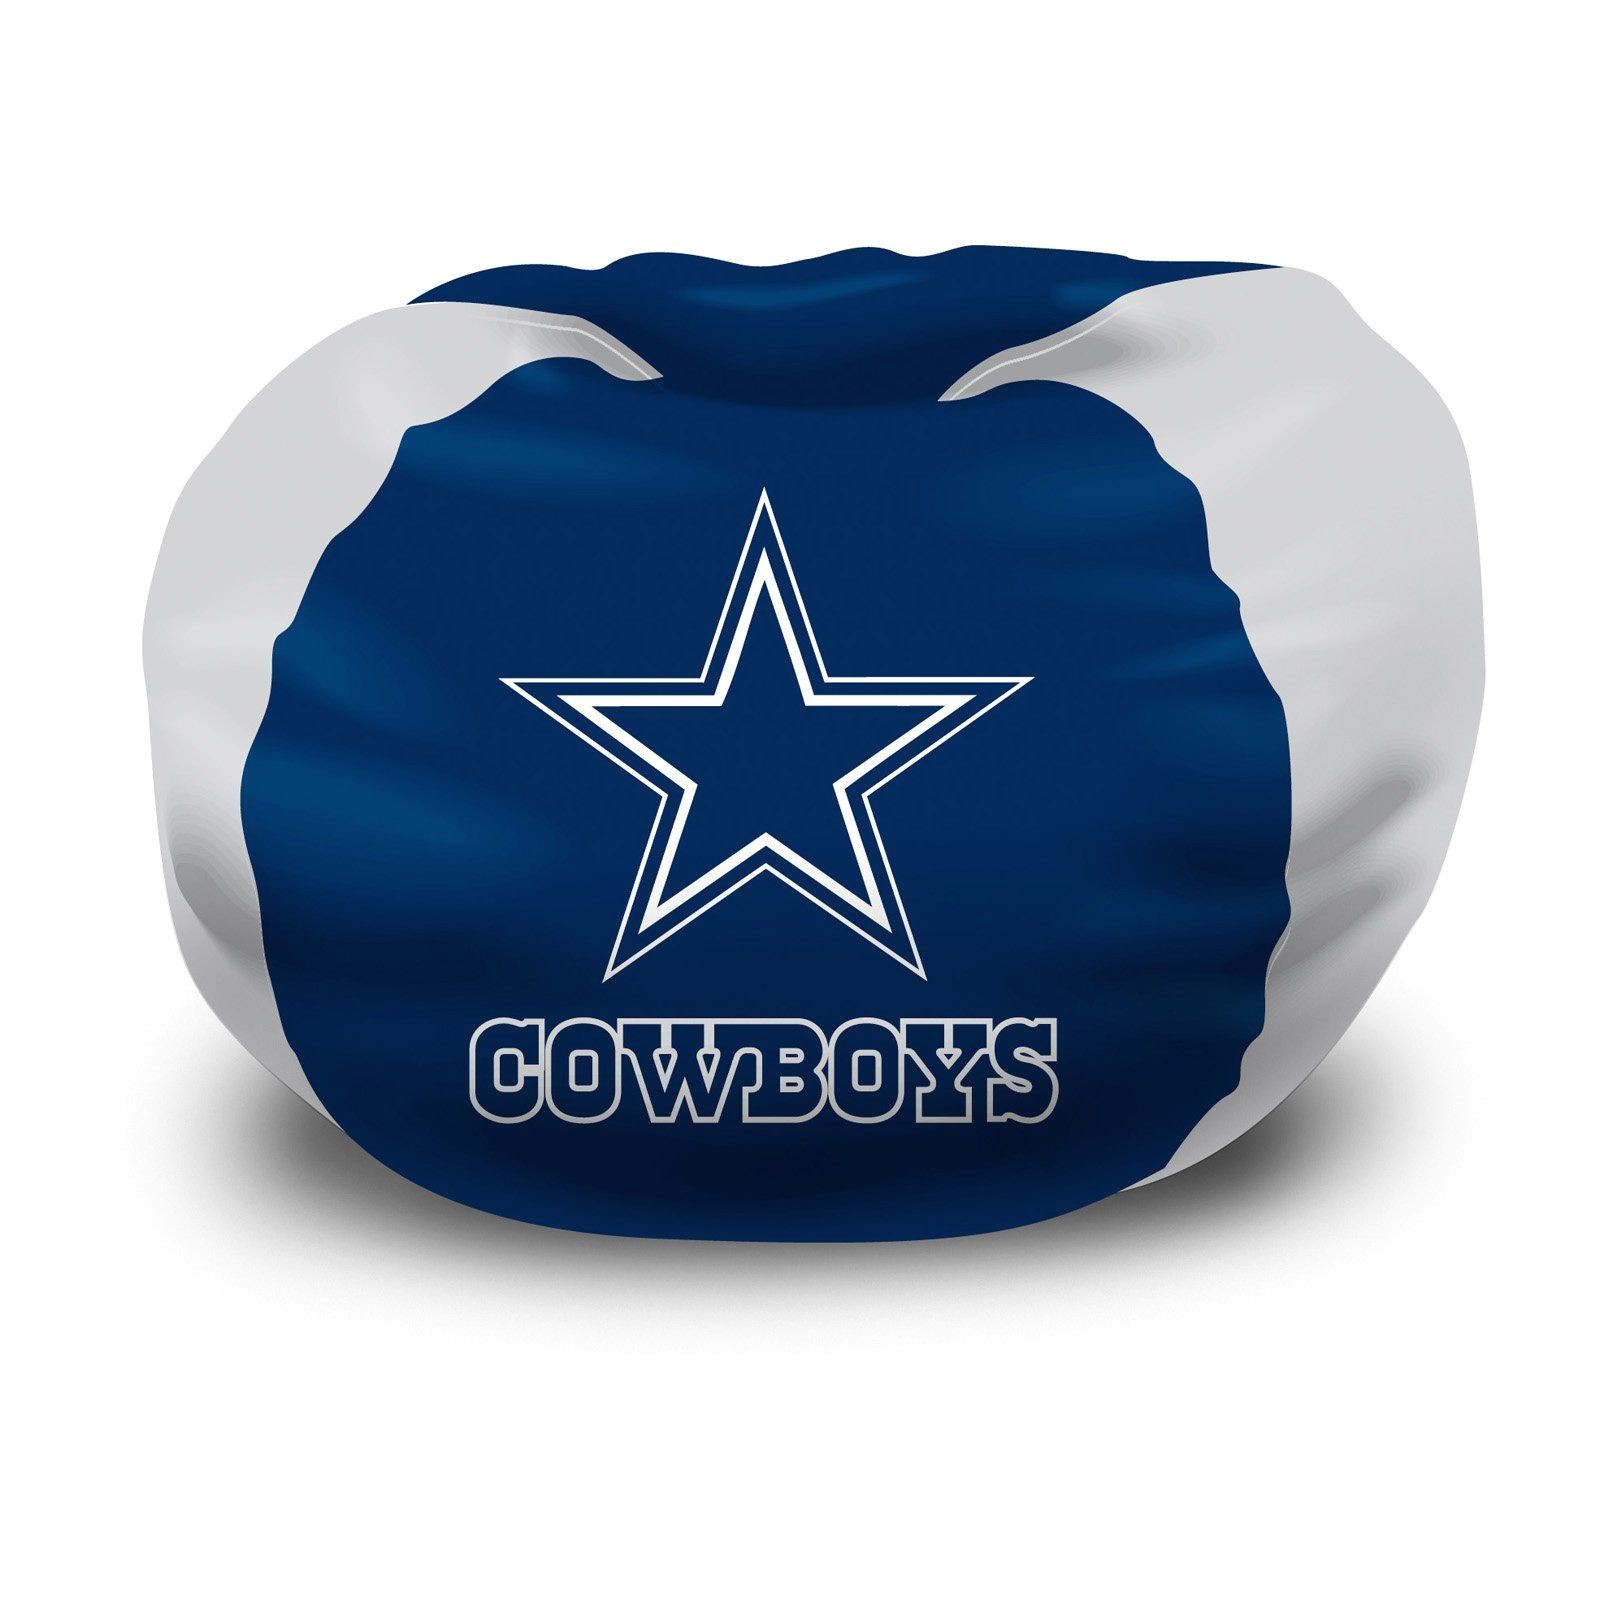 kids nfl dallas cowboys bean bag chair is perfect for bedroom living room or any room chair has a soft comfortable feel that contours to fit your need